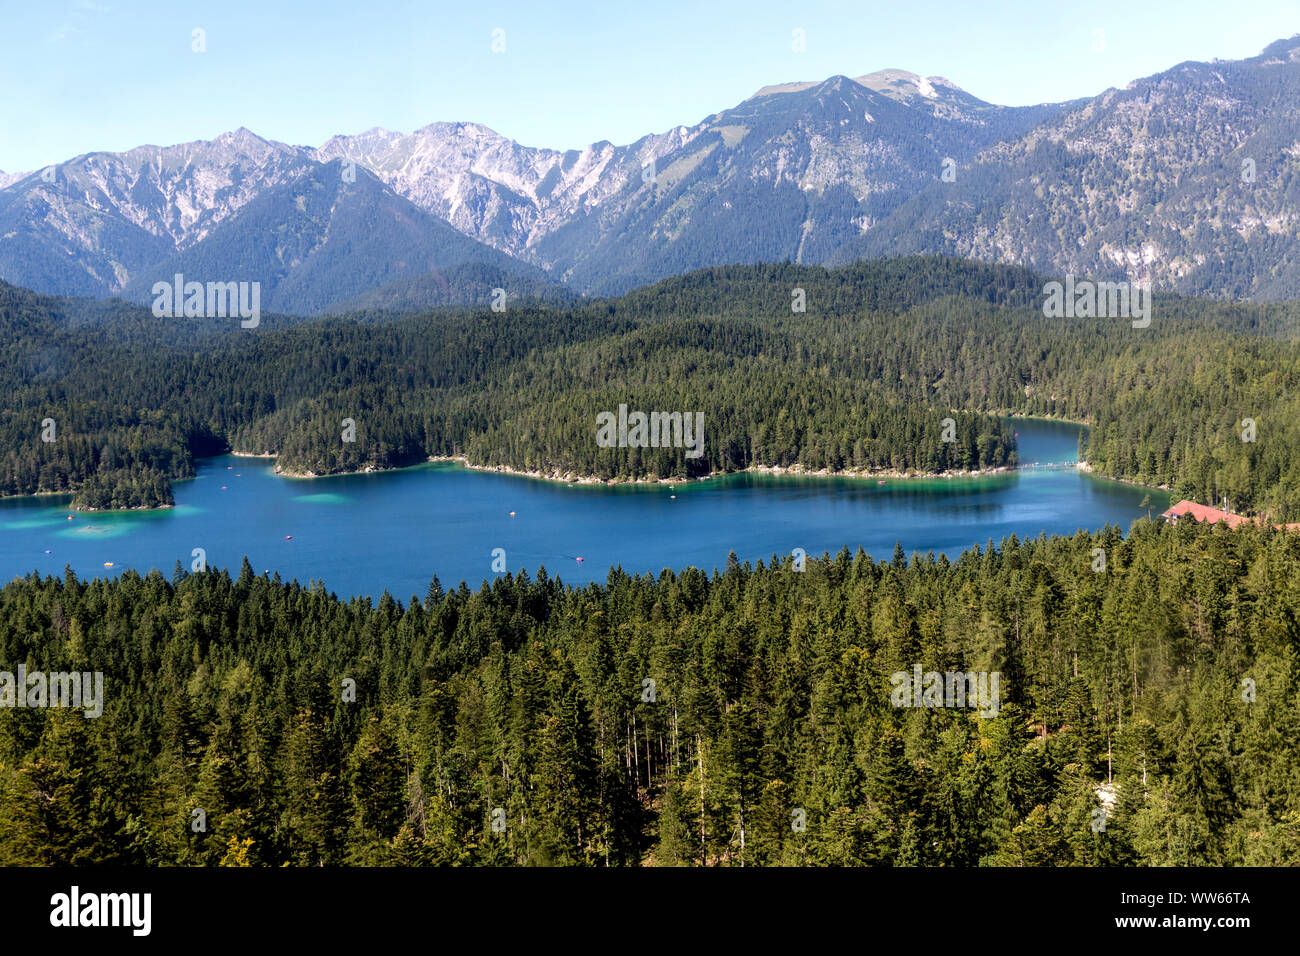 View at Eibsee from the Eibsee cable car, Zugspitze, 2962 m, the highest mountain peak of Germany, Wetterstein Range, Eastern Alps, Alps, Garmisch-Partenkirchen, Bavaria, Germany, Europe Stock Photo